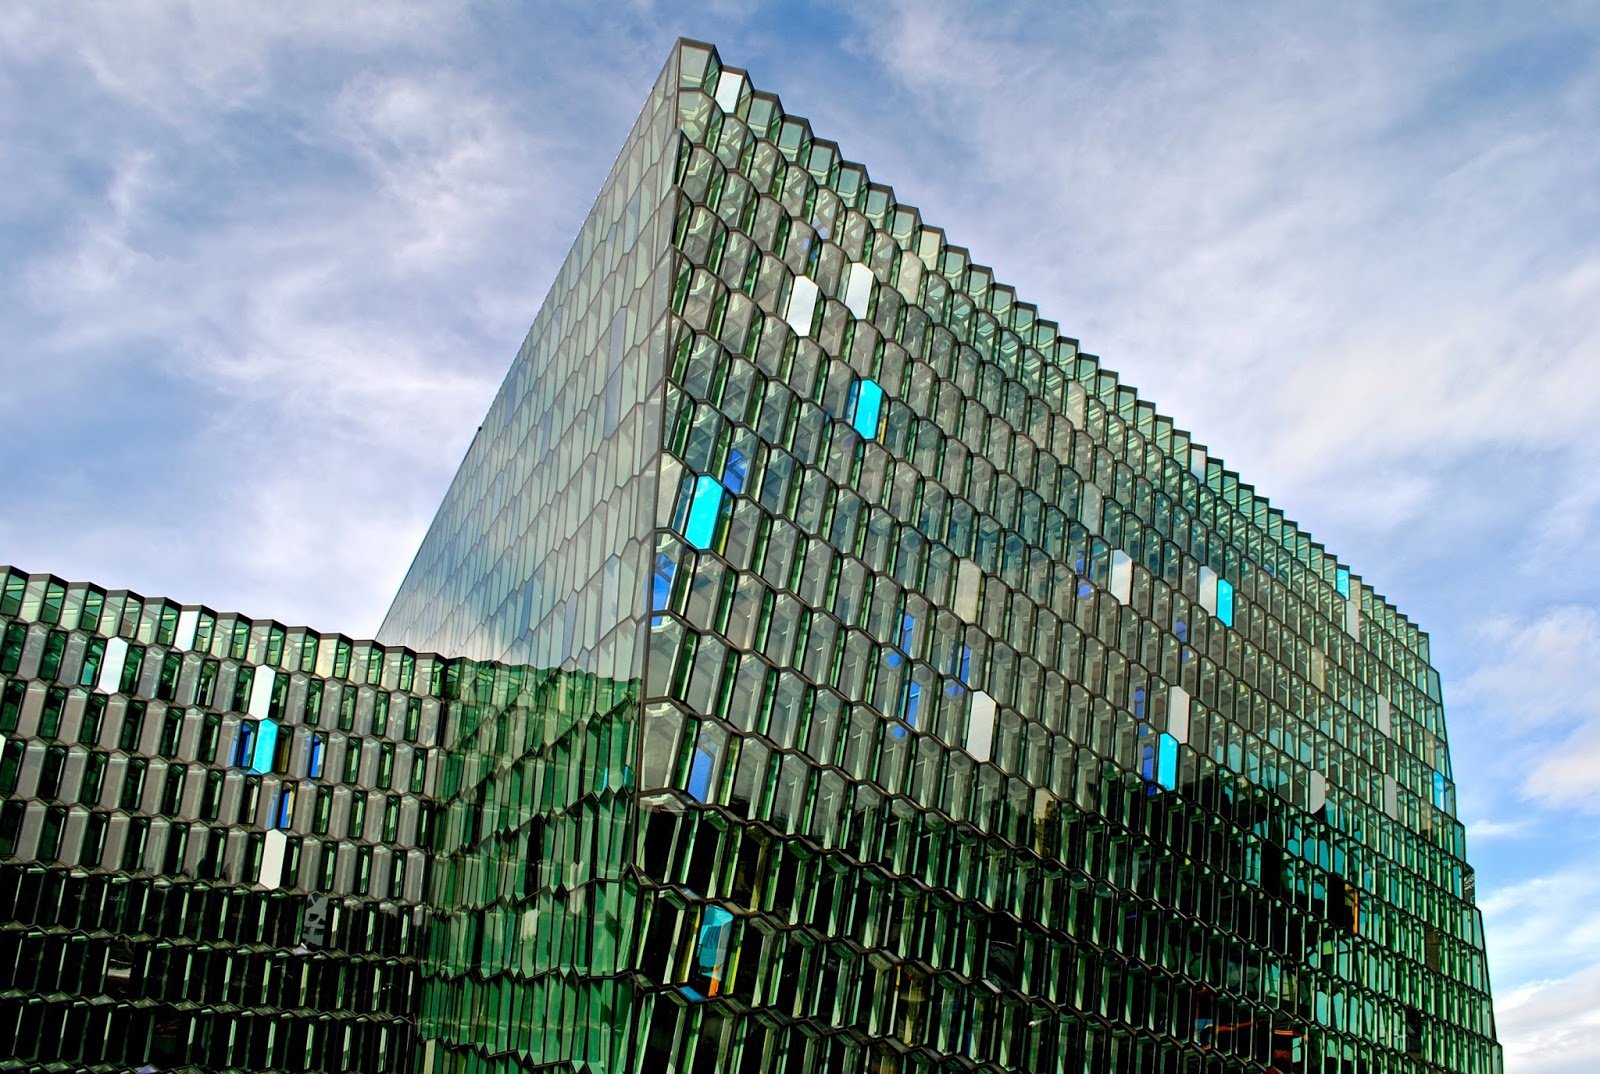 Things to do in Reykjavik Iceland : Visit the Harpa concert hall